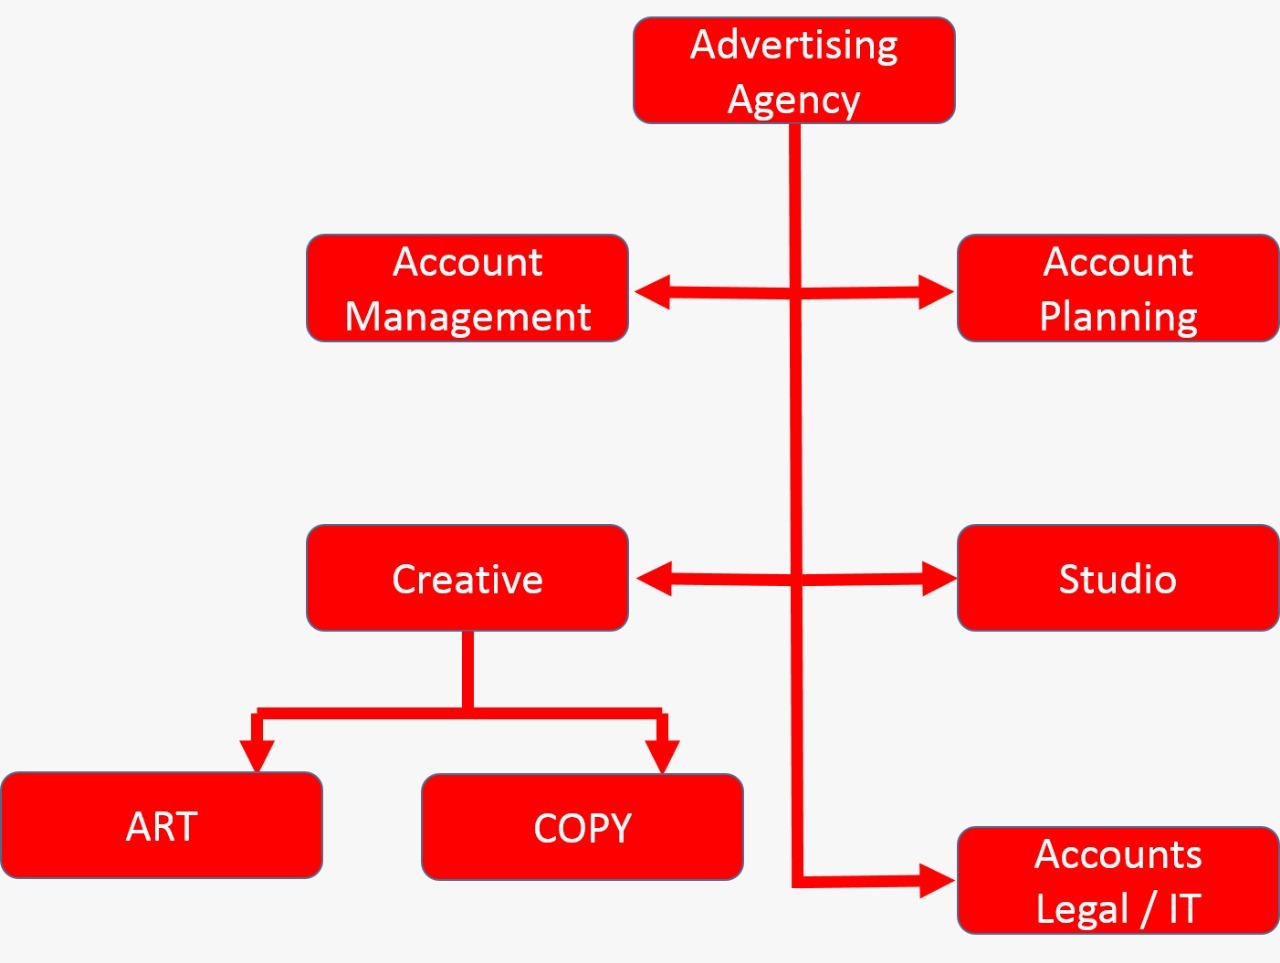 Structure of Advertising Agency